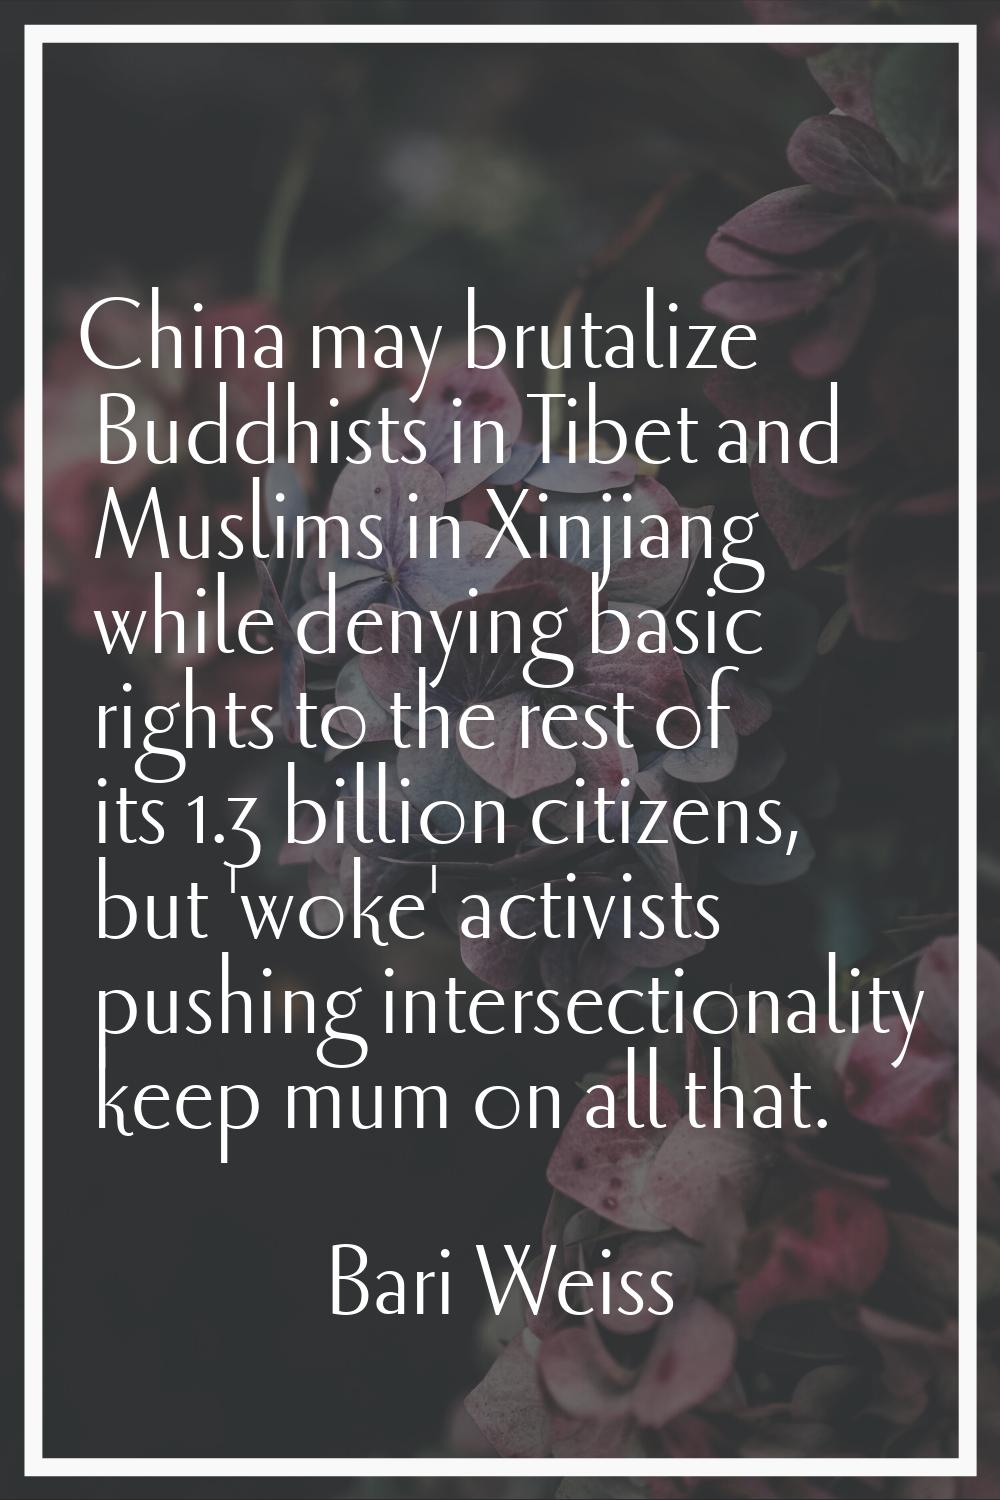 China may brutalize Buddhists in Tibet and Muslims in Xinjiang while denying basic rights to the re